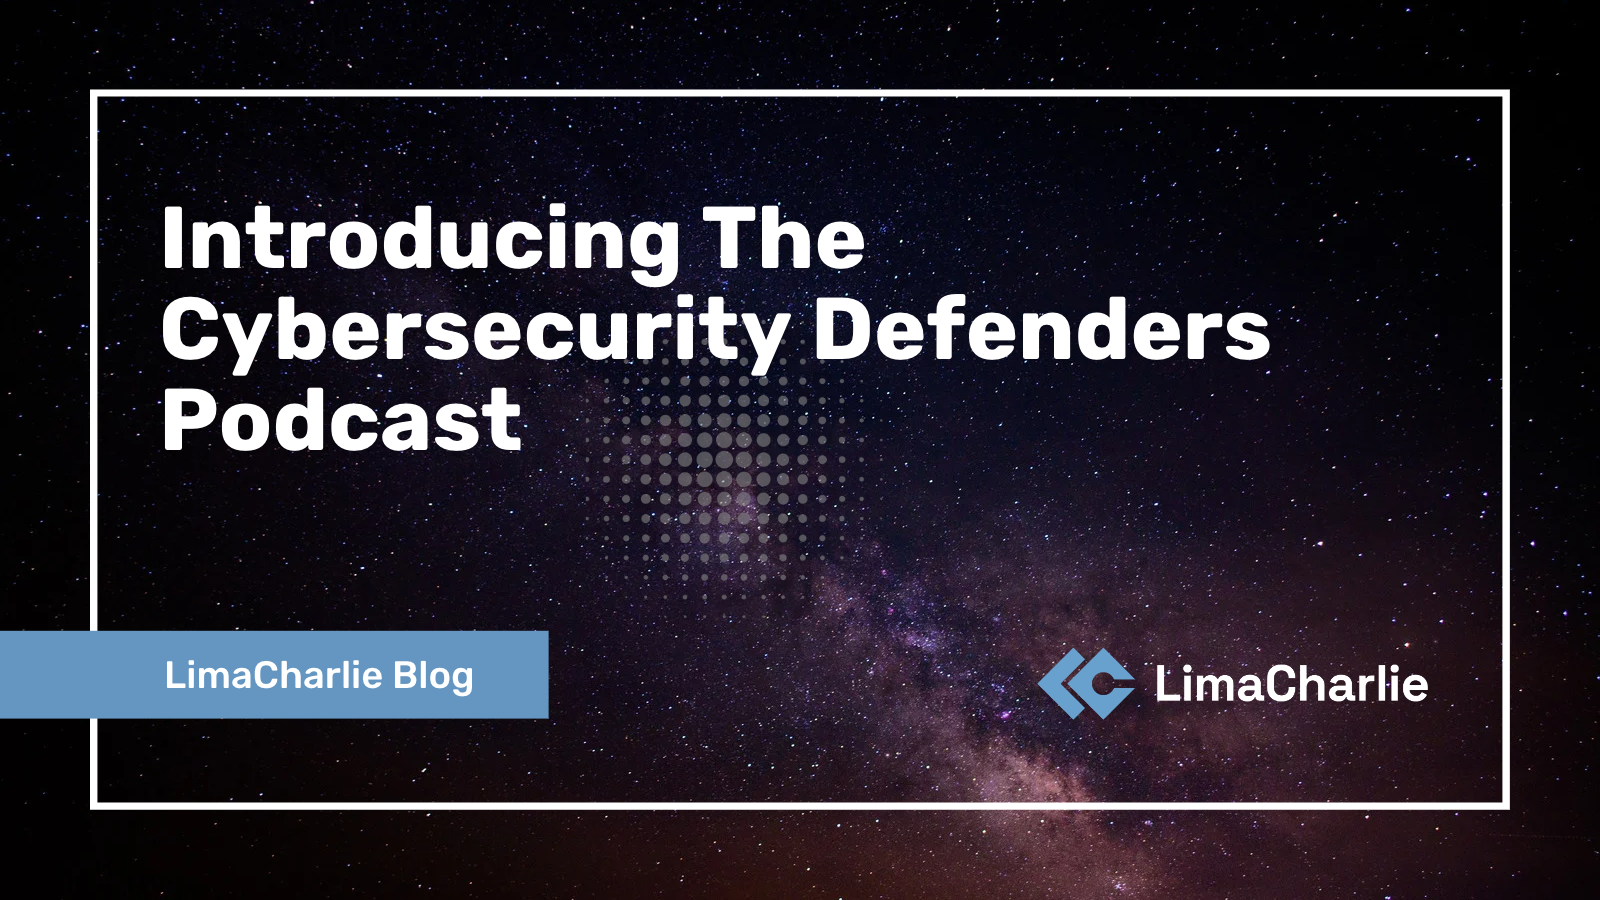 Introducing The Cybersecurity Defenders Podcast